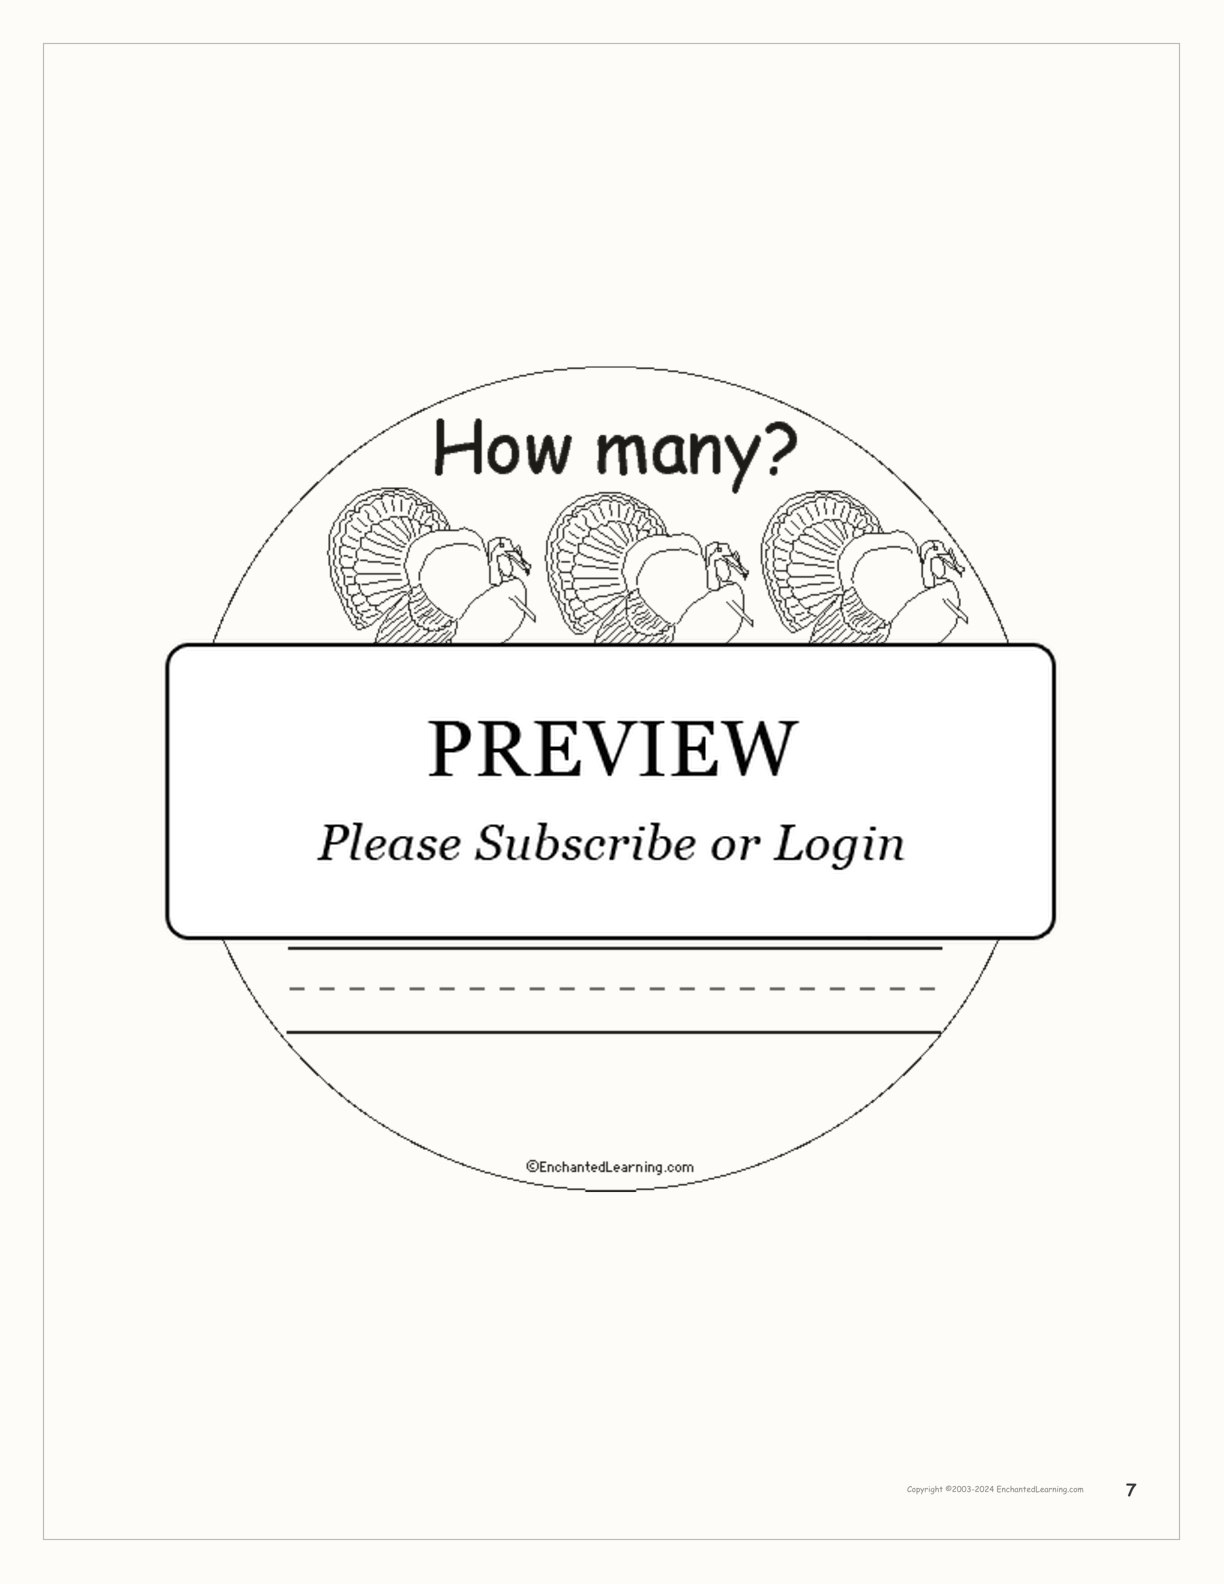 How Many Turkeys? interactive printout page 7